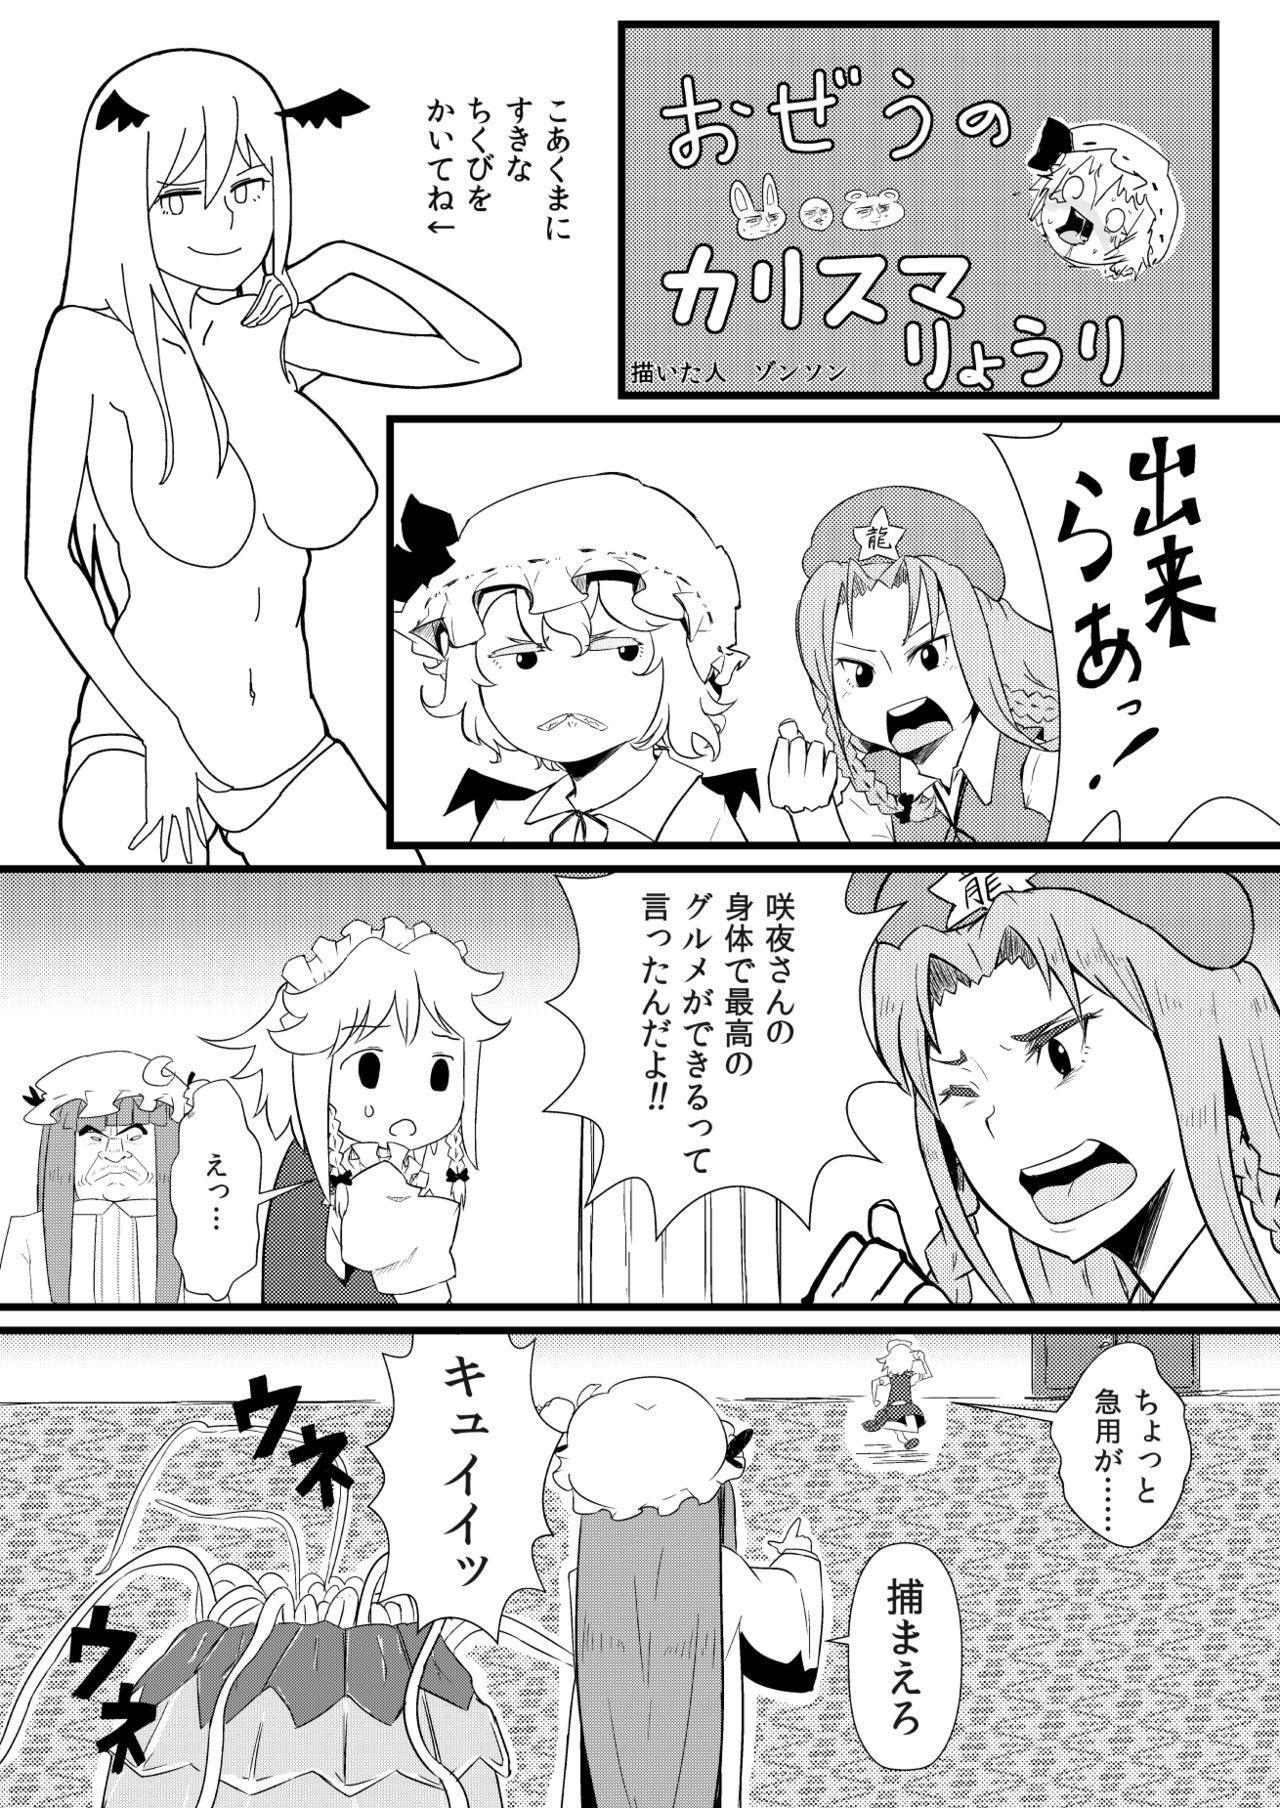 Missionary Position Porn 東方板としあき合同誌5 - Touhou project Tongue - Page 5